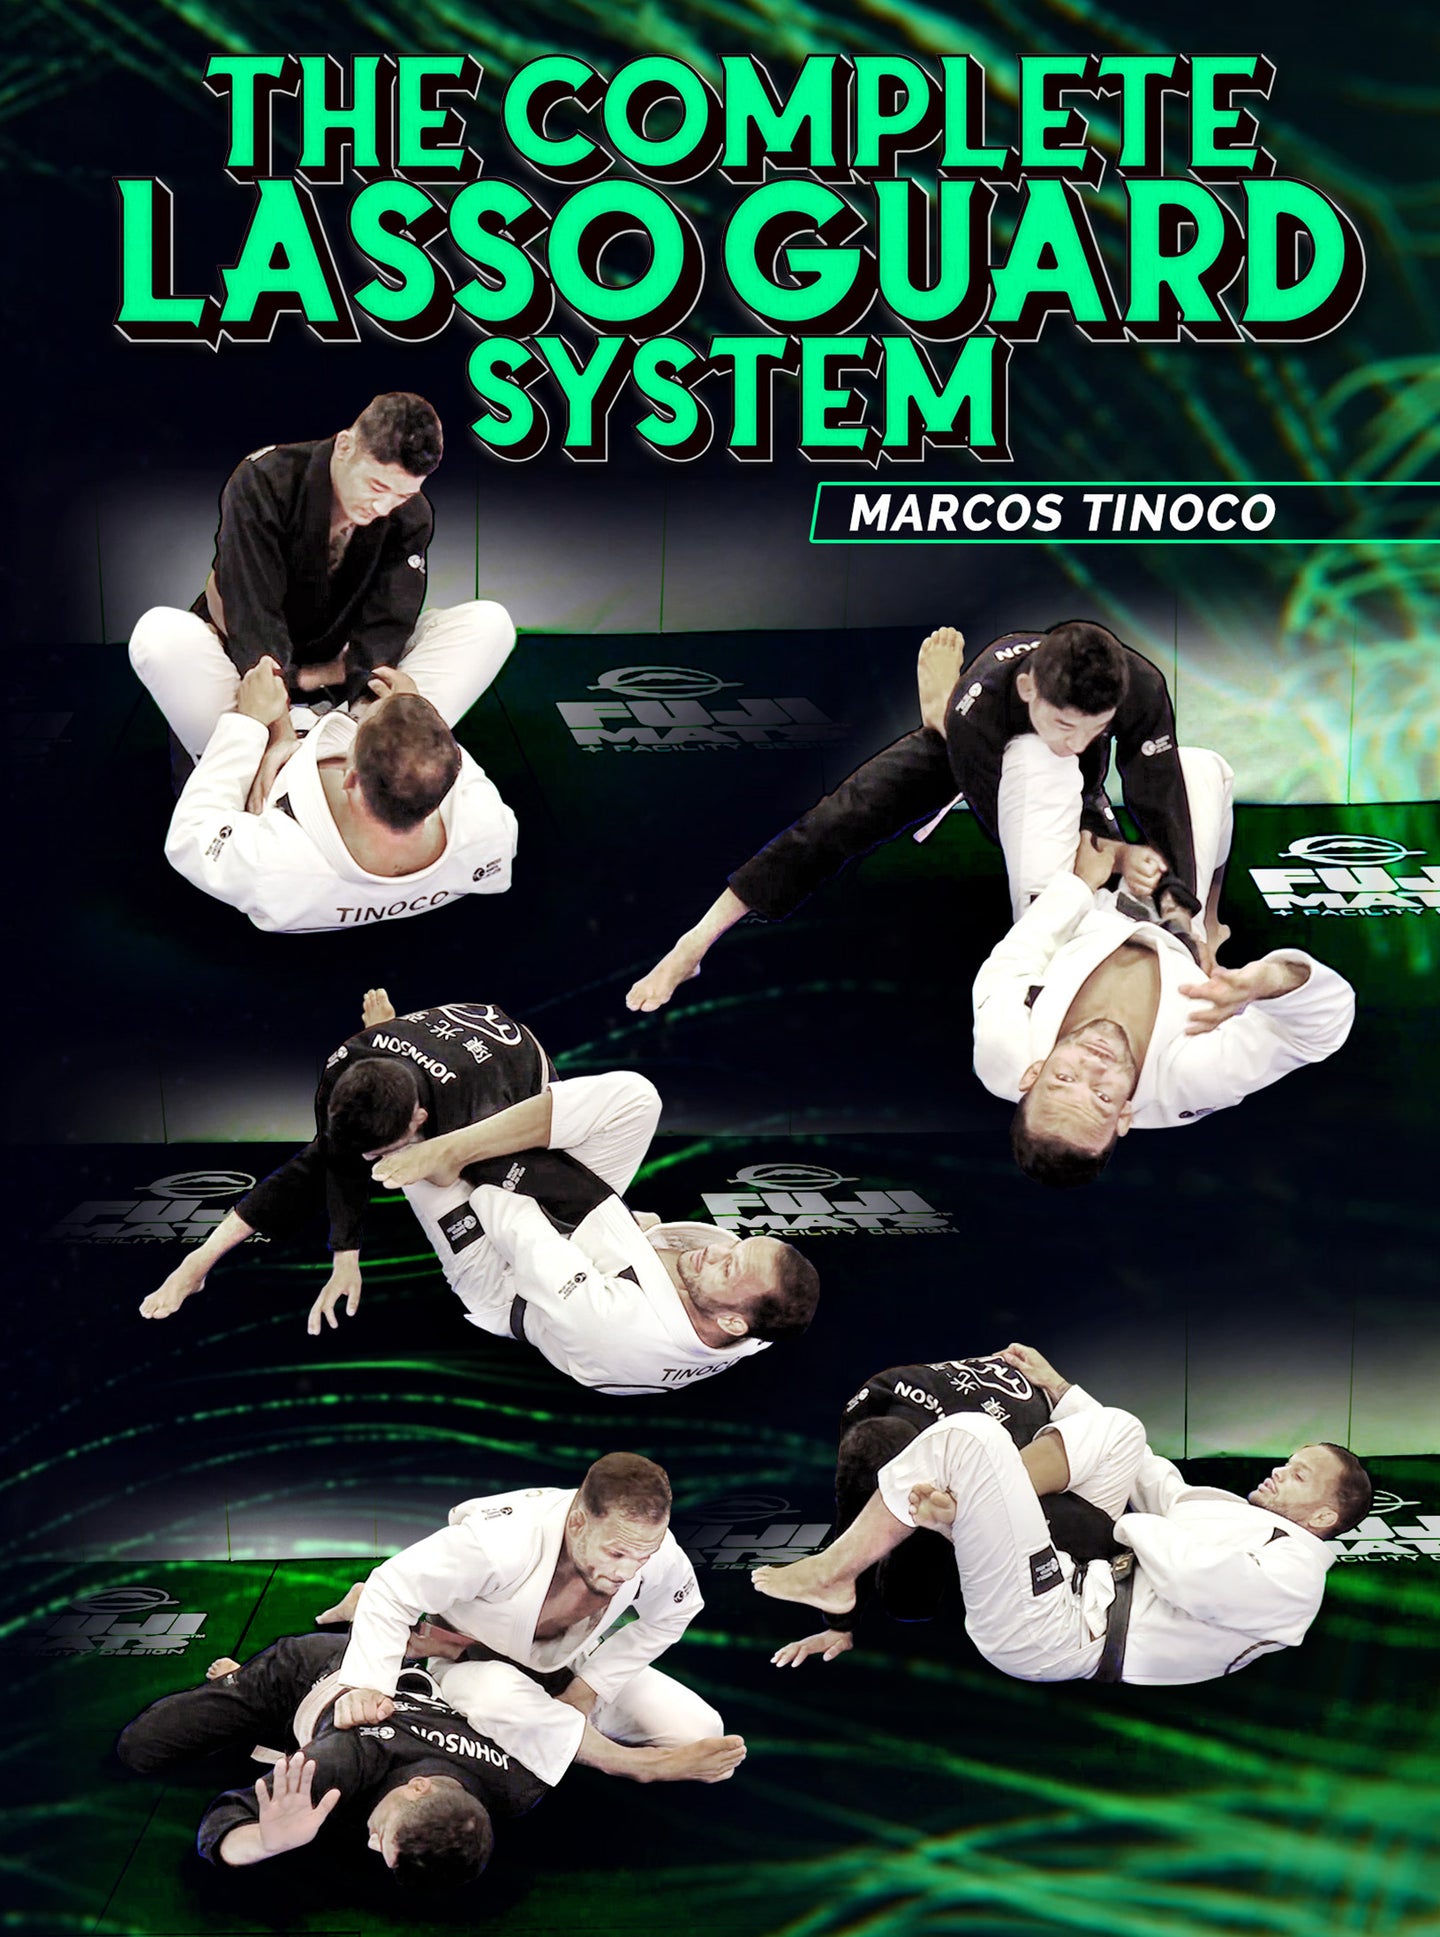 The Complete Lasso Guard System by Marcos Tinoco - BJJ Fanatics